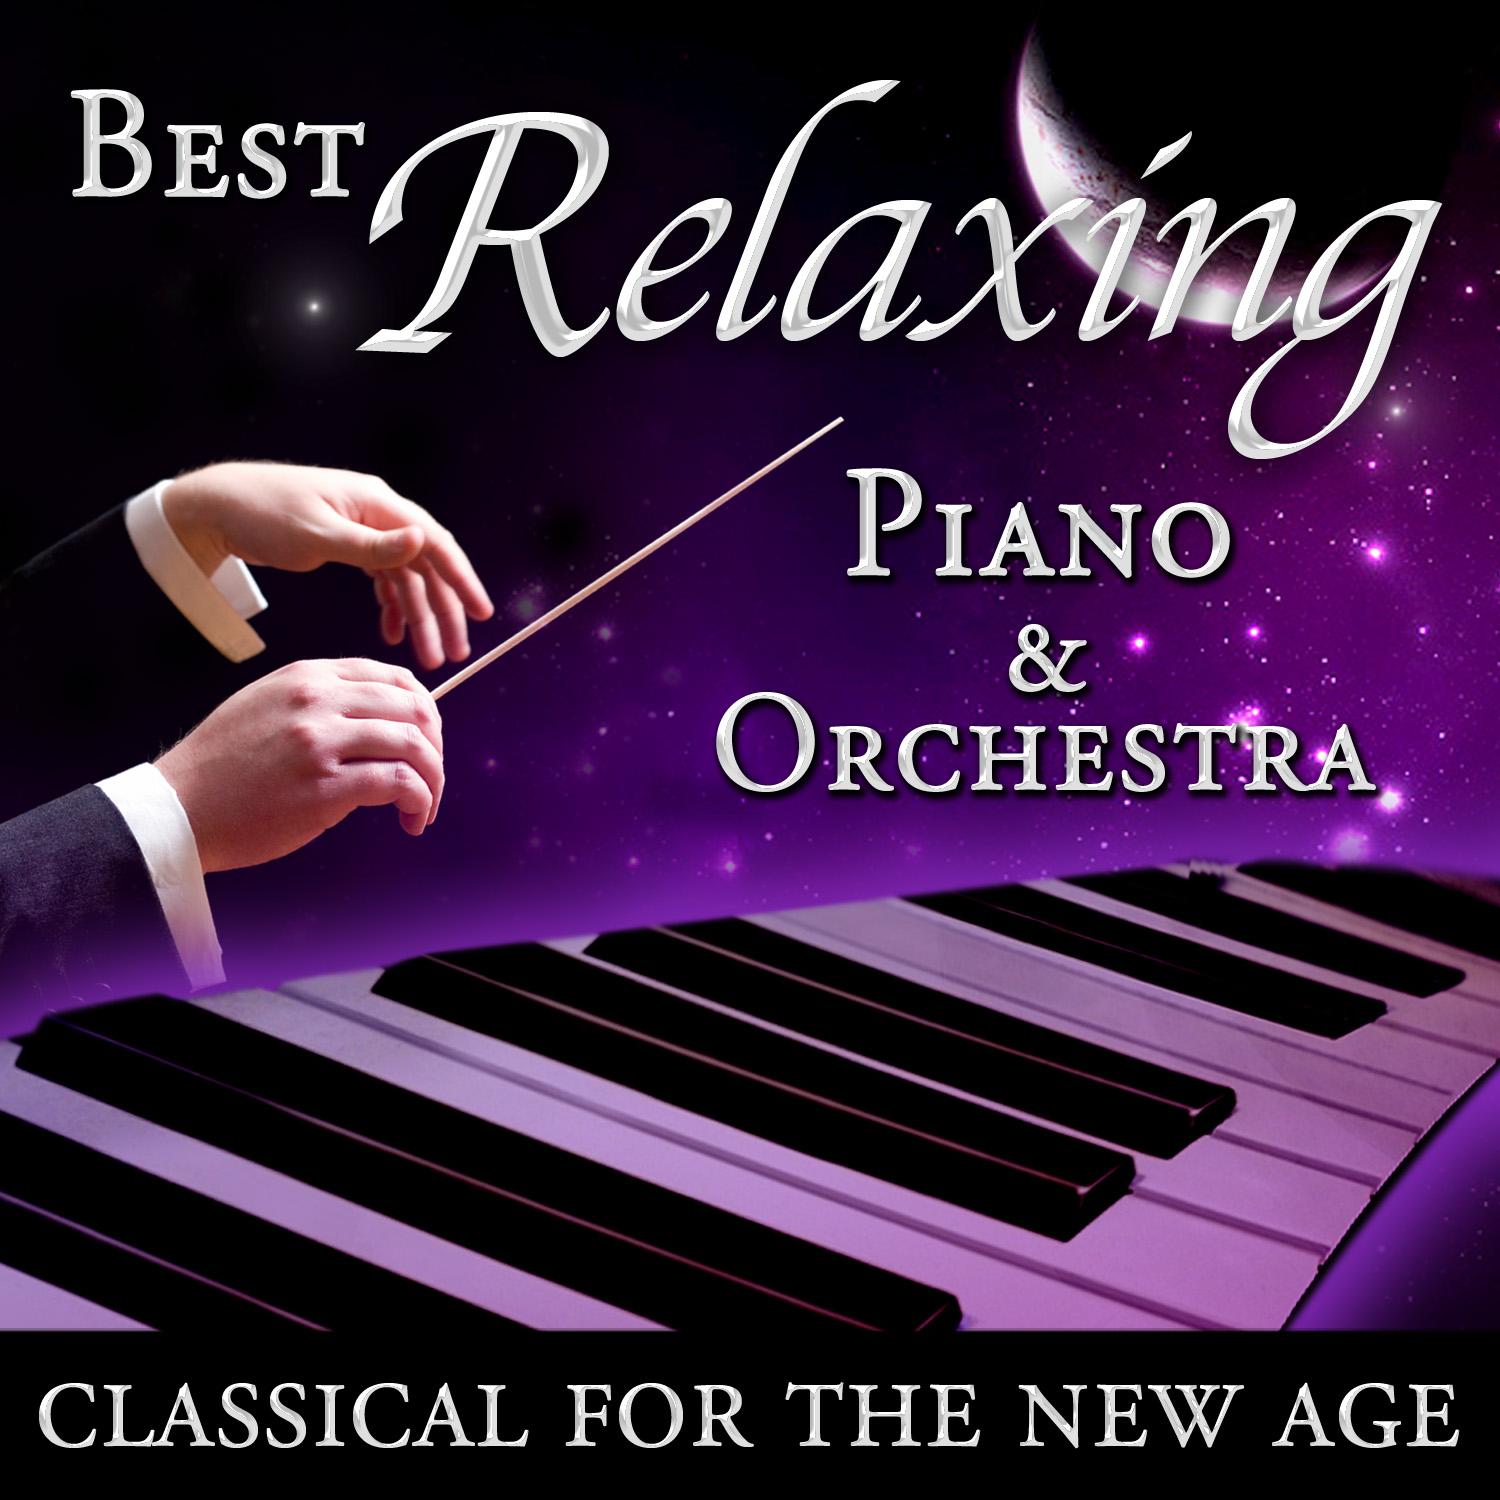 Best Relaxing Piano & Orchestra - Classical for the New Age